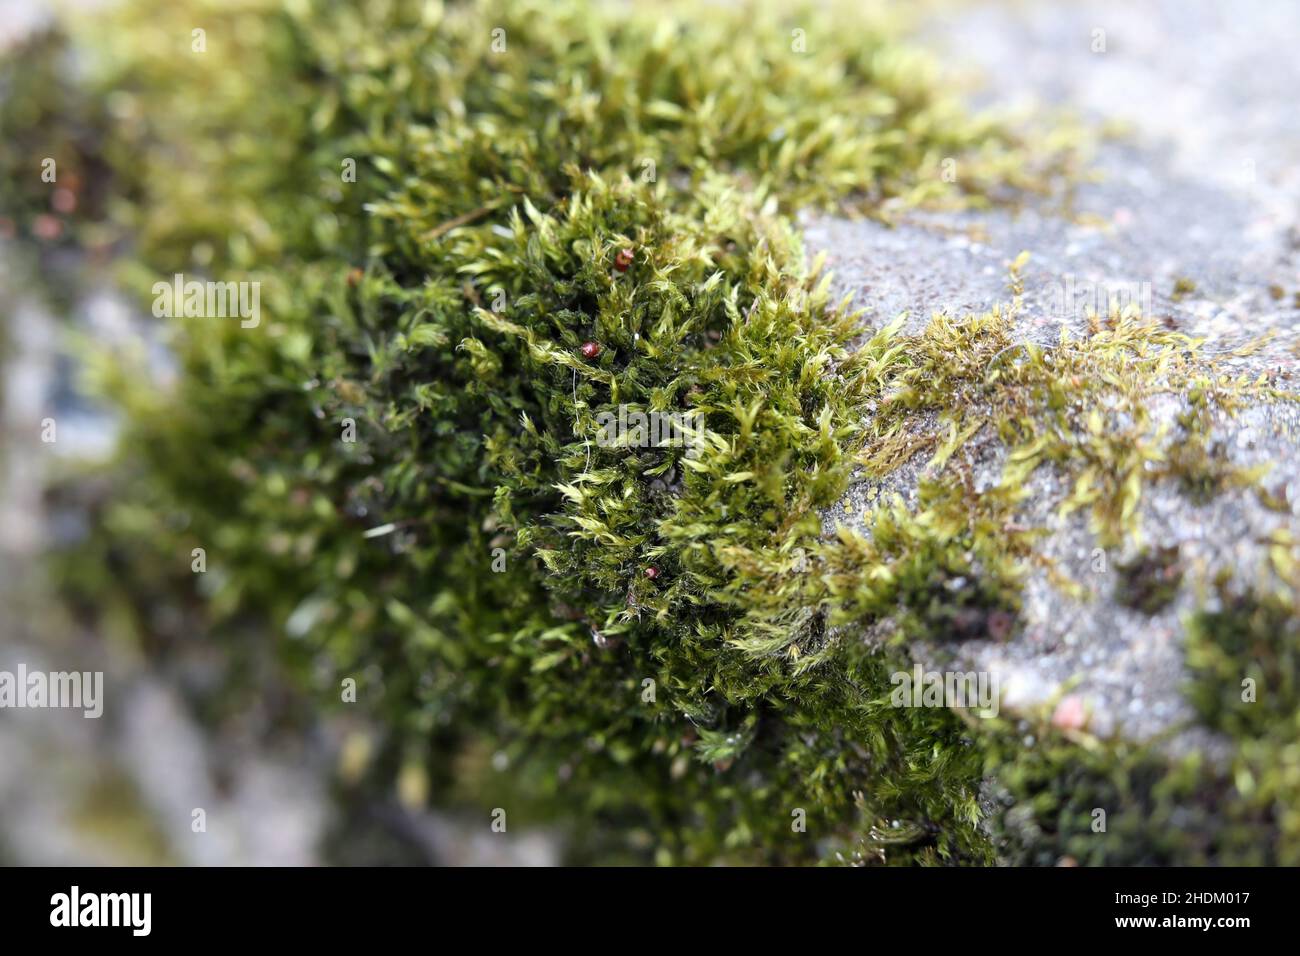 Closeup of some green moss on a rock. The most common moss species in Finland called Seinäsammal (Pleurozium schreberi) and red-stemmed feathermoss. Stock Photo